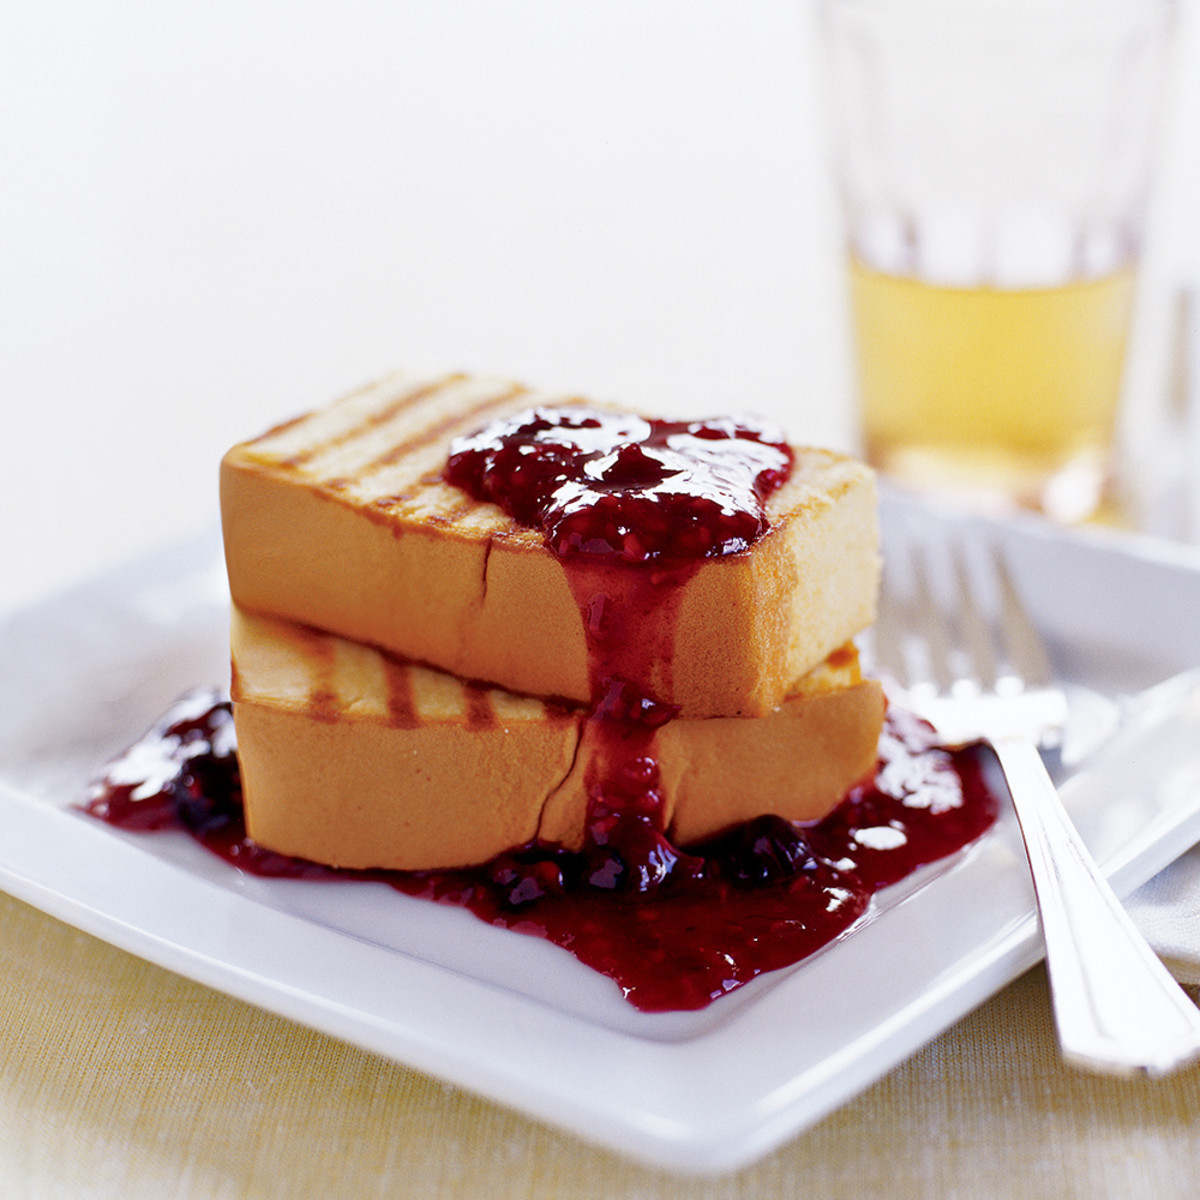 Grilled Pound Cake
 Grilled Pound Cake with Warm Berry Sauce Rachael Ray